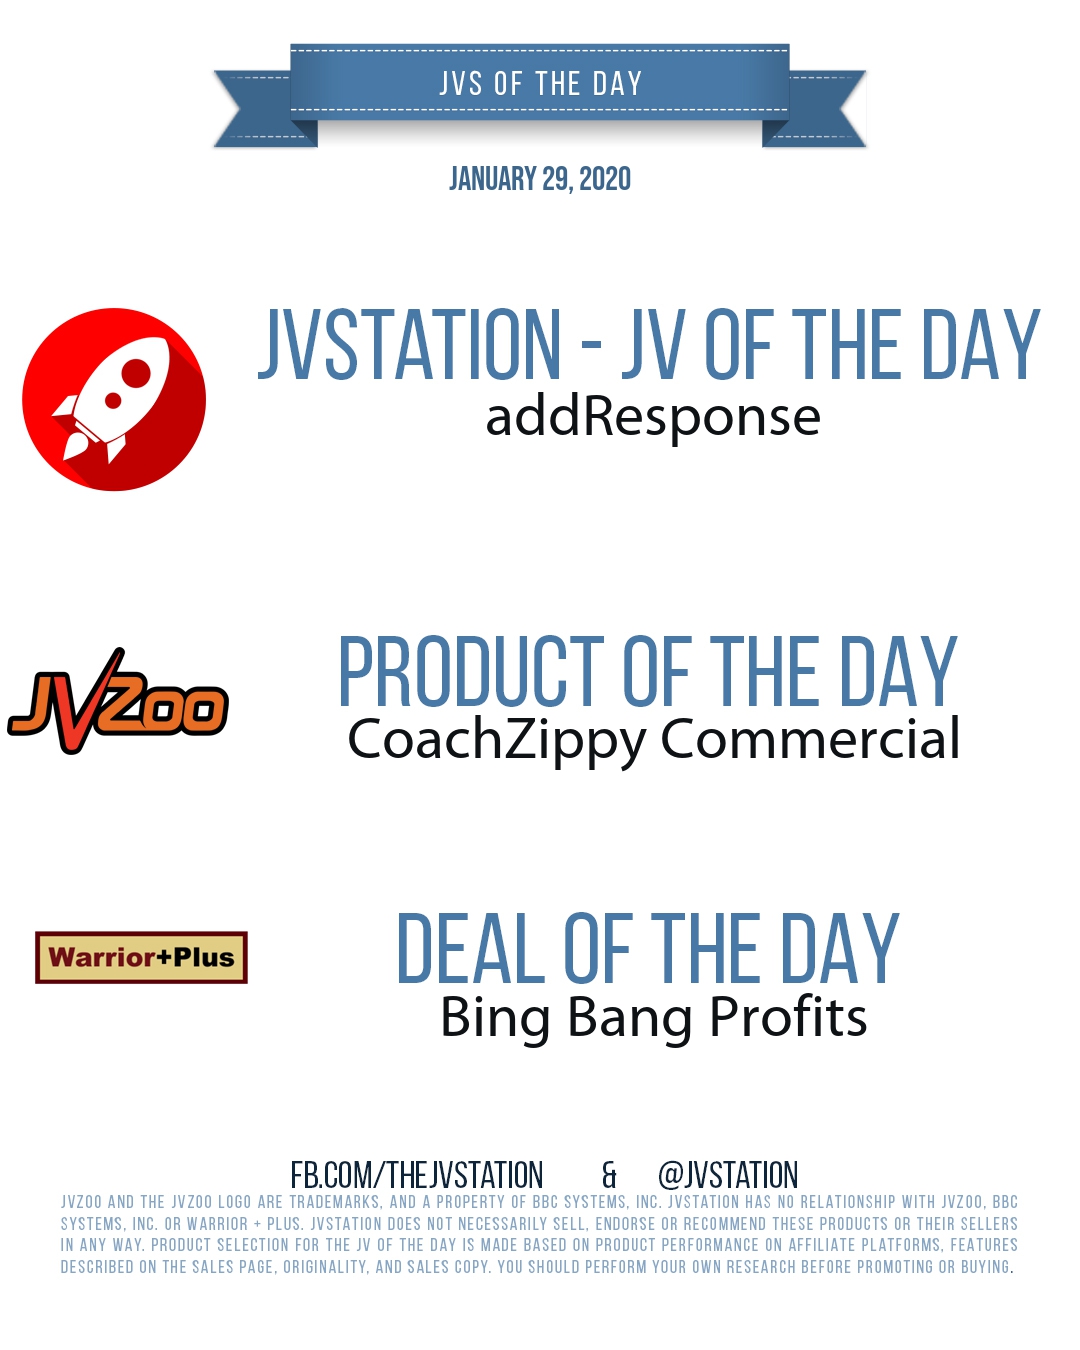 JVs of the day - January 29, 2020